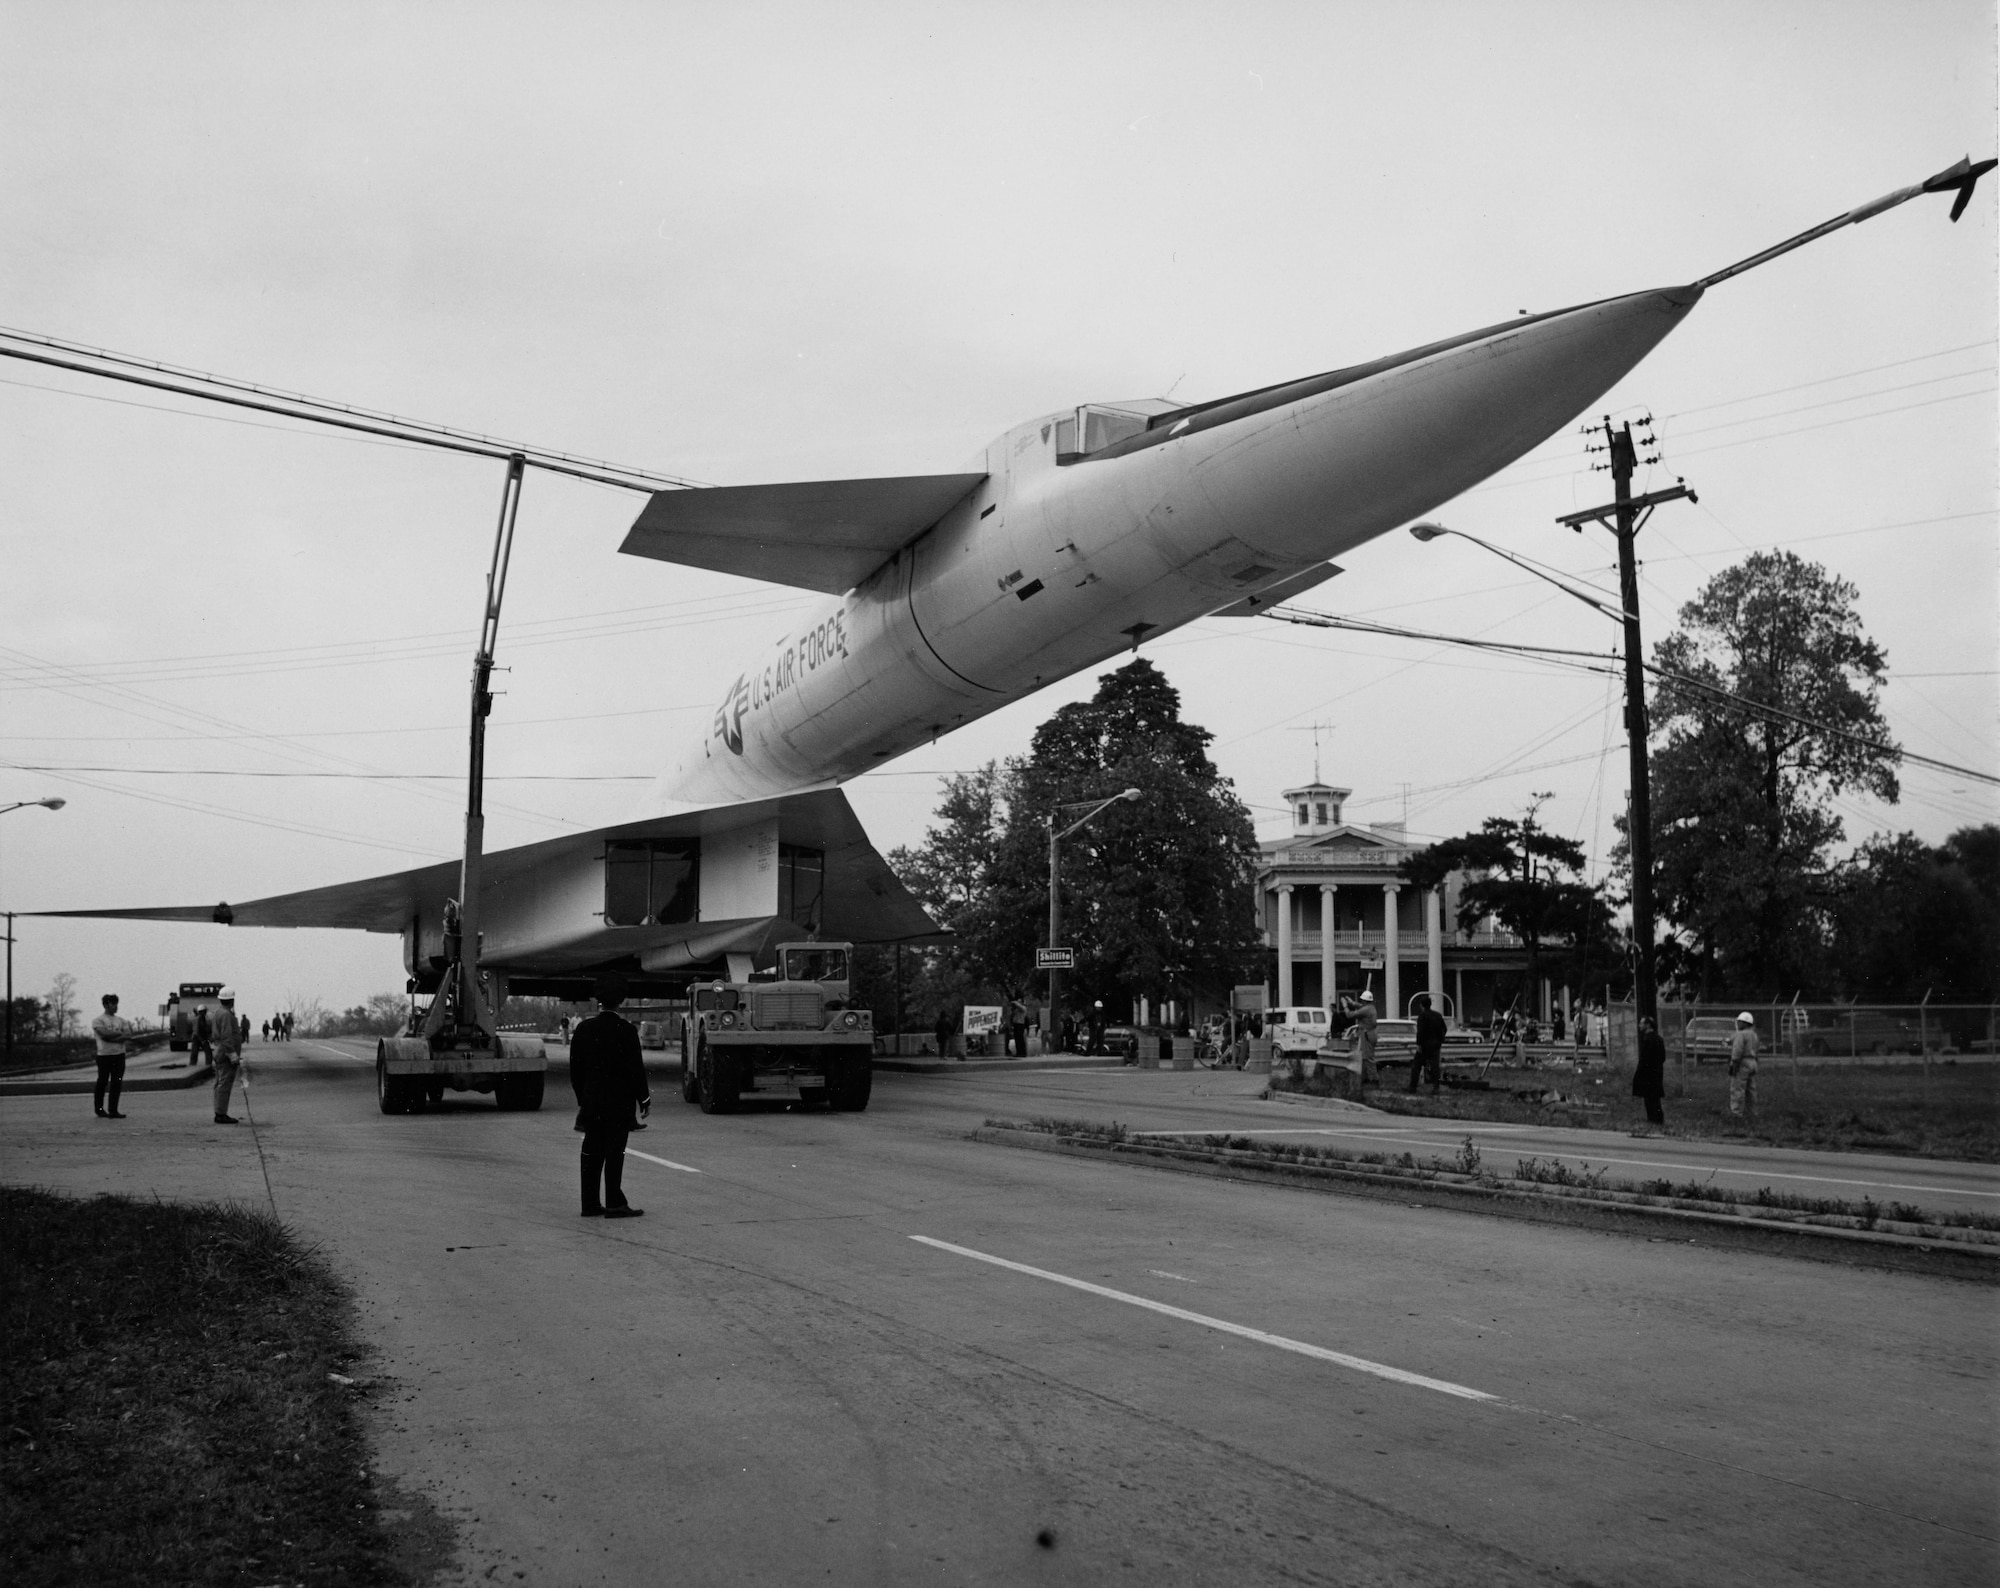 The North American XB-70 Valkyrie moves from the Air Force Museum at Patterson Field down State Route 444 to the new home at historic Wright Field during 1970-71. (U.S. Air Force photo)